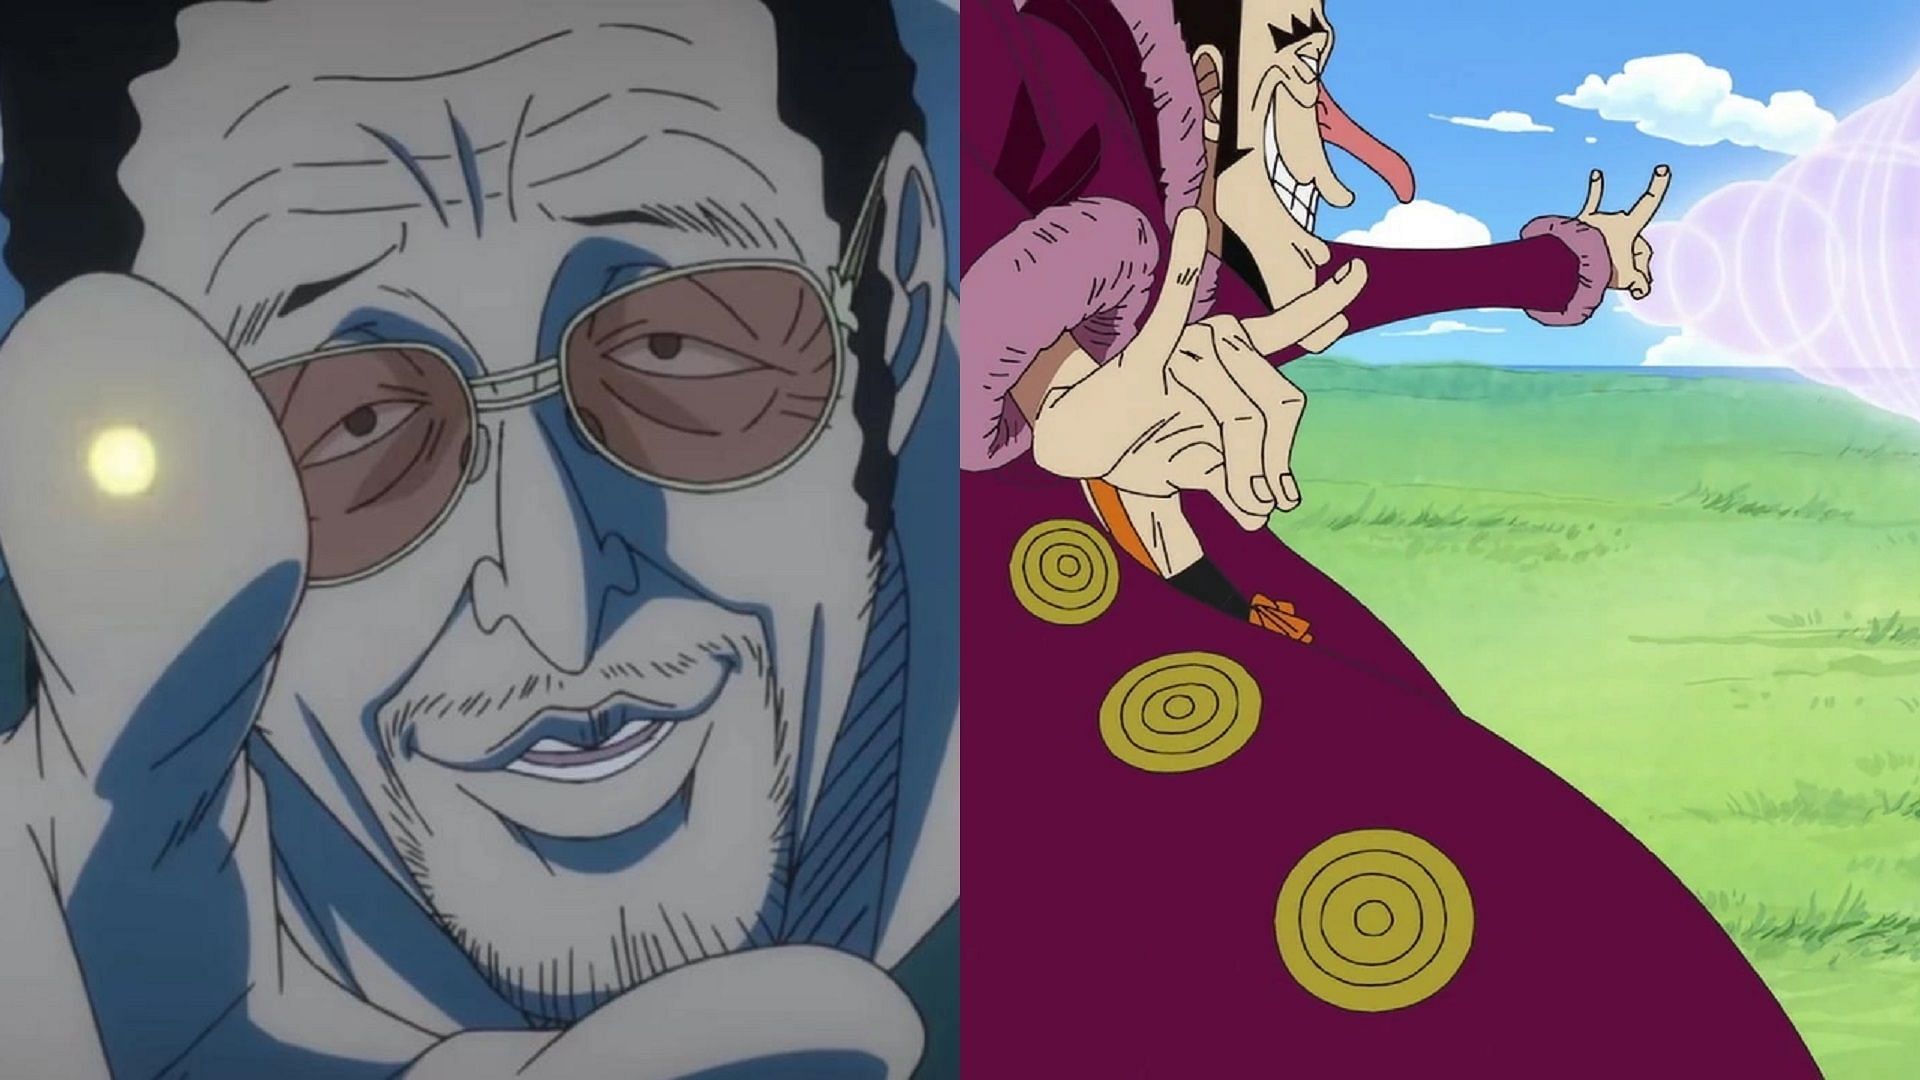 Kizaru and Foxy using their Devil Fruits as seen in One Piece (Image via Toei Animation, One Piece)